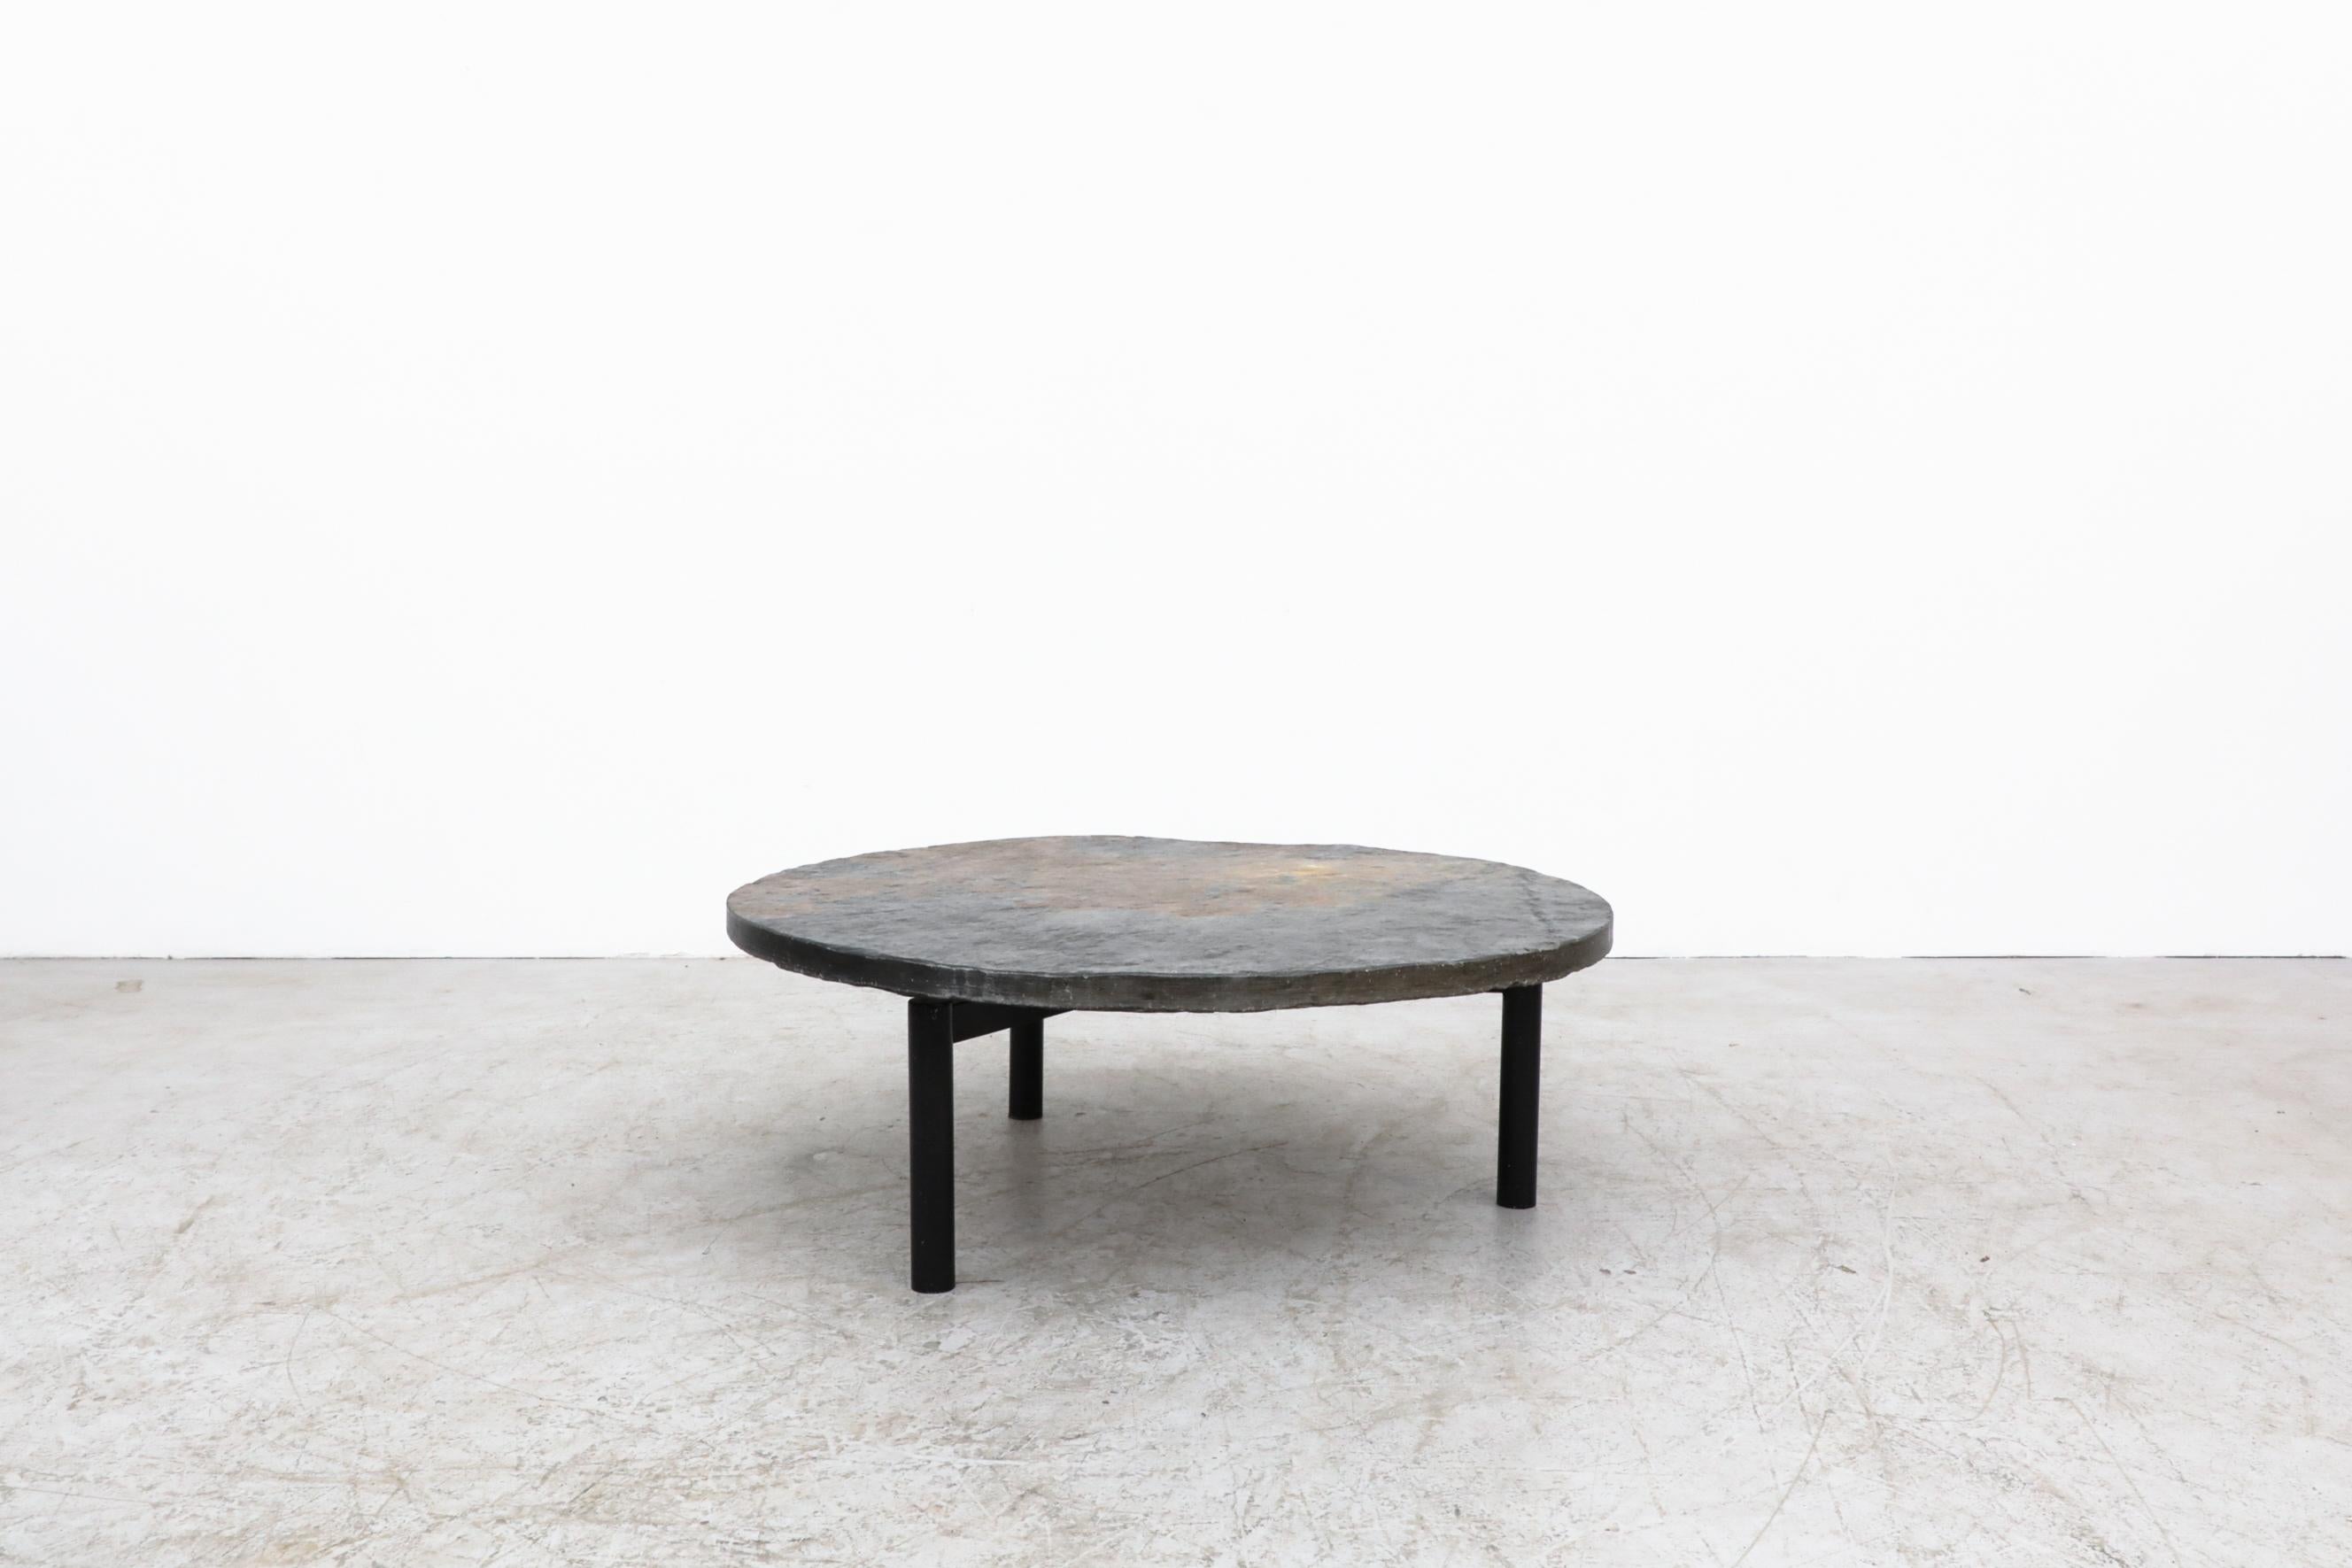 'T Spectrum round stone coffee table with black enameled tripod base. Heavy stone slab top with beautiful coloring. Stone has some scratching and chipping. The base has visible scratches as well. Bolts in the frame top act as leveling tools. In